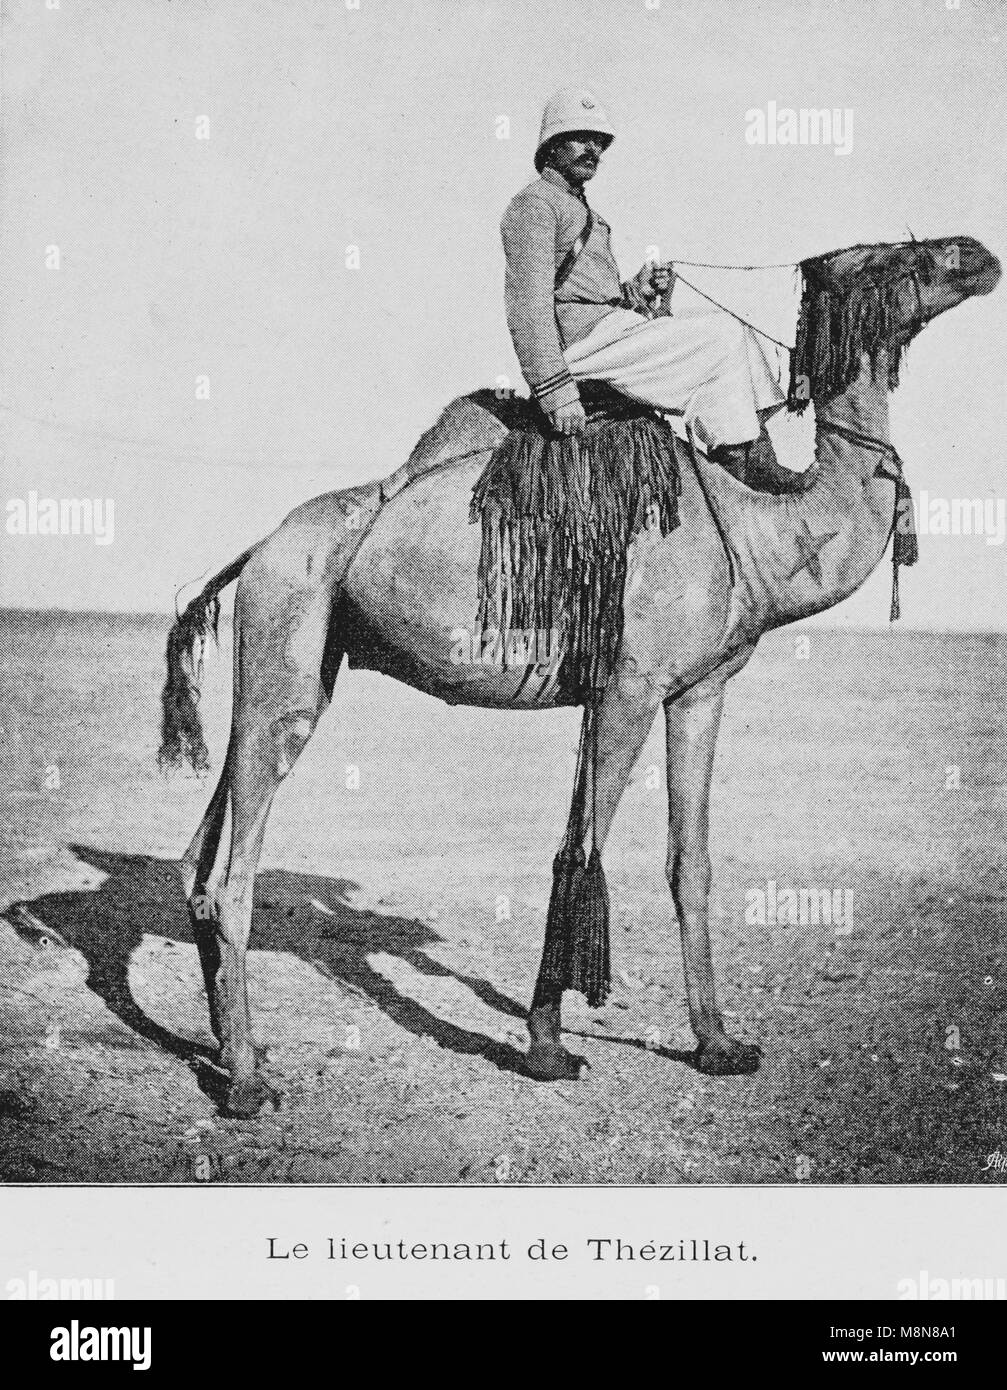 French Foureau-Lamy expedition in Chad in 1900, Lieutenant de Thezillat, Picture from the French weekly newspaper l'Illustration, 9th September 1900 Stock Photo